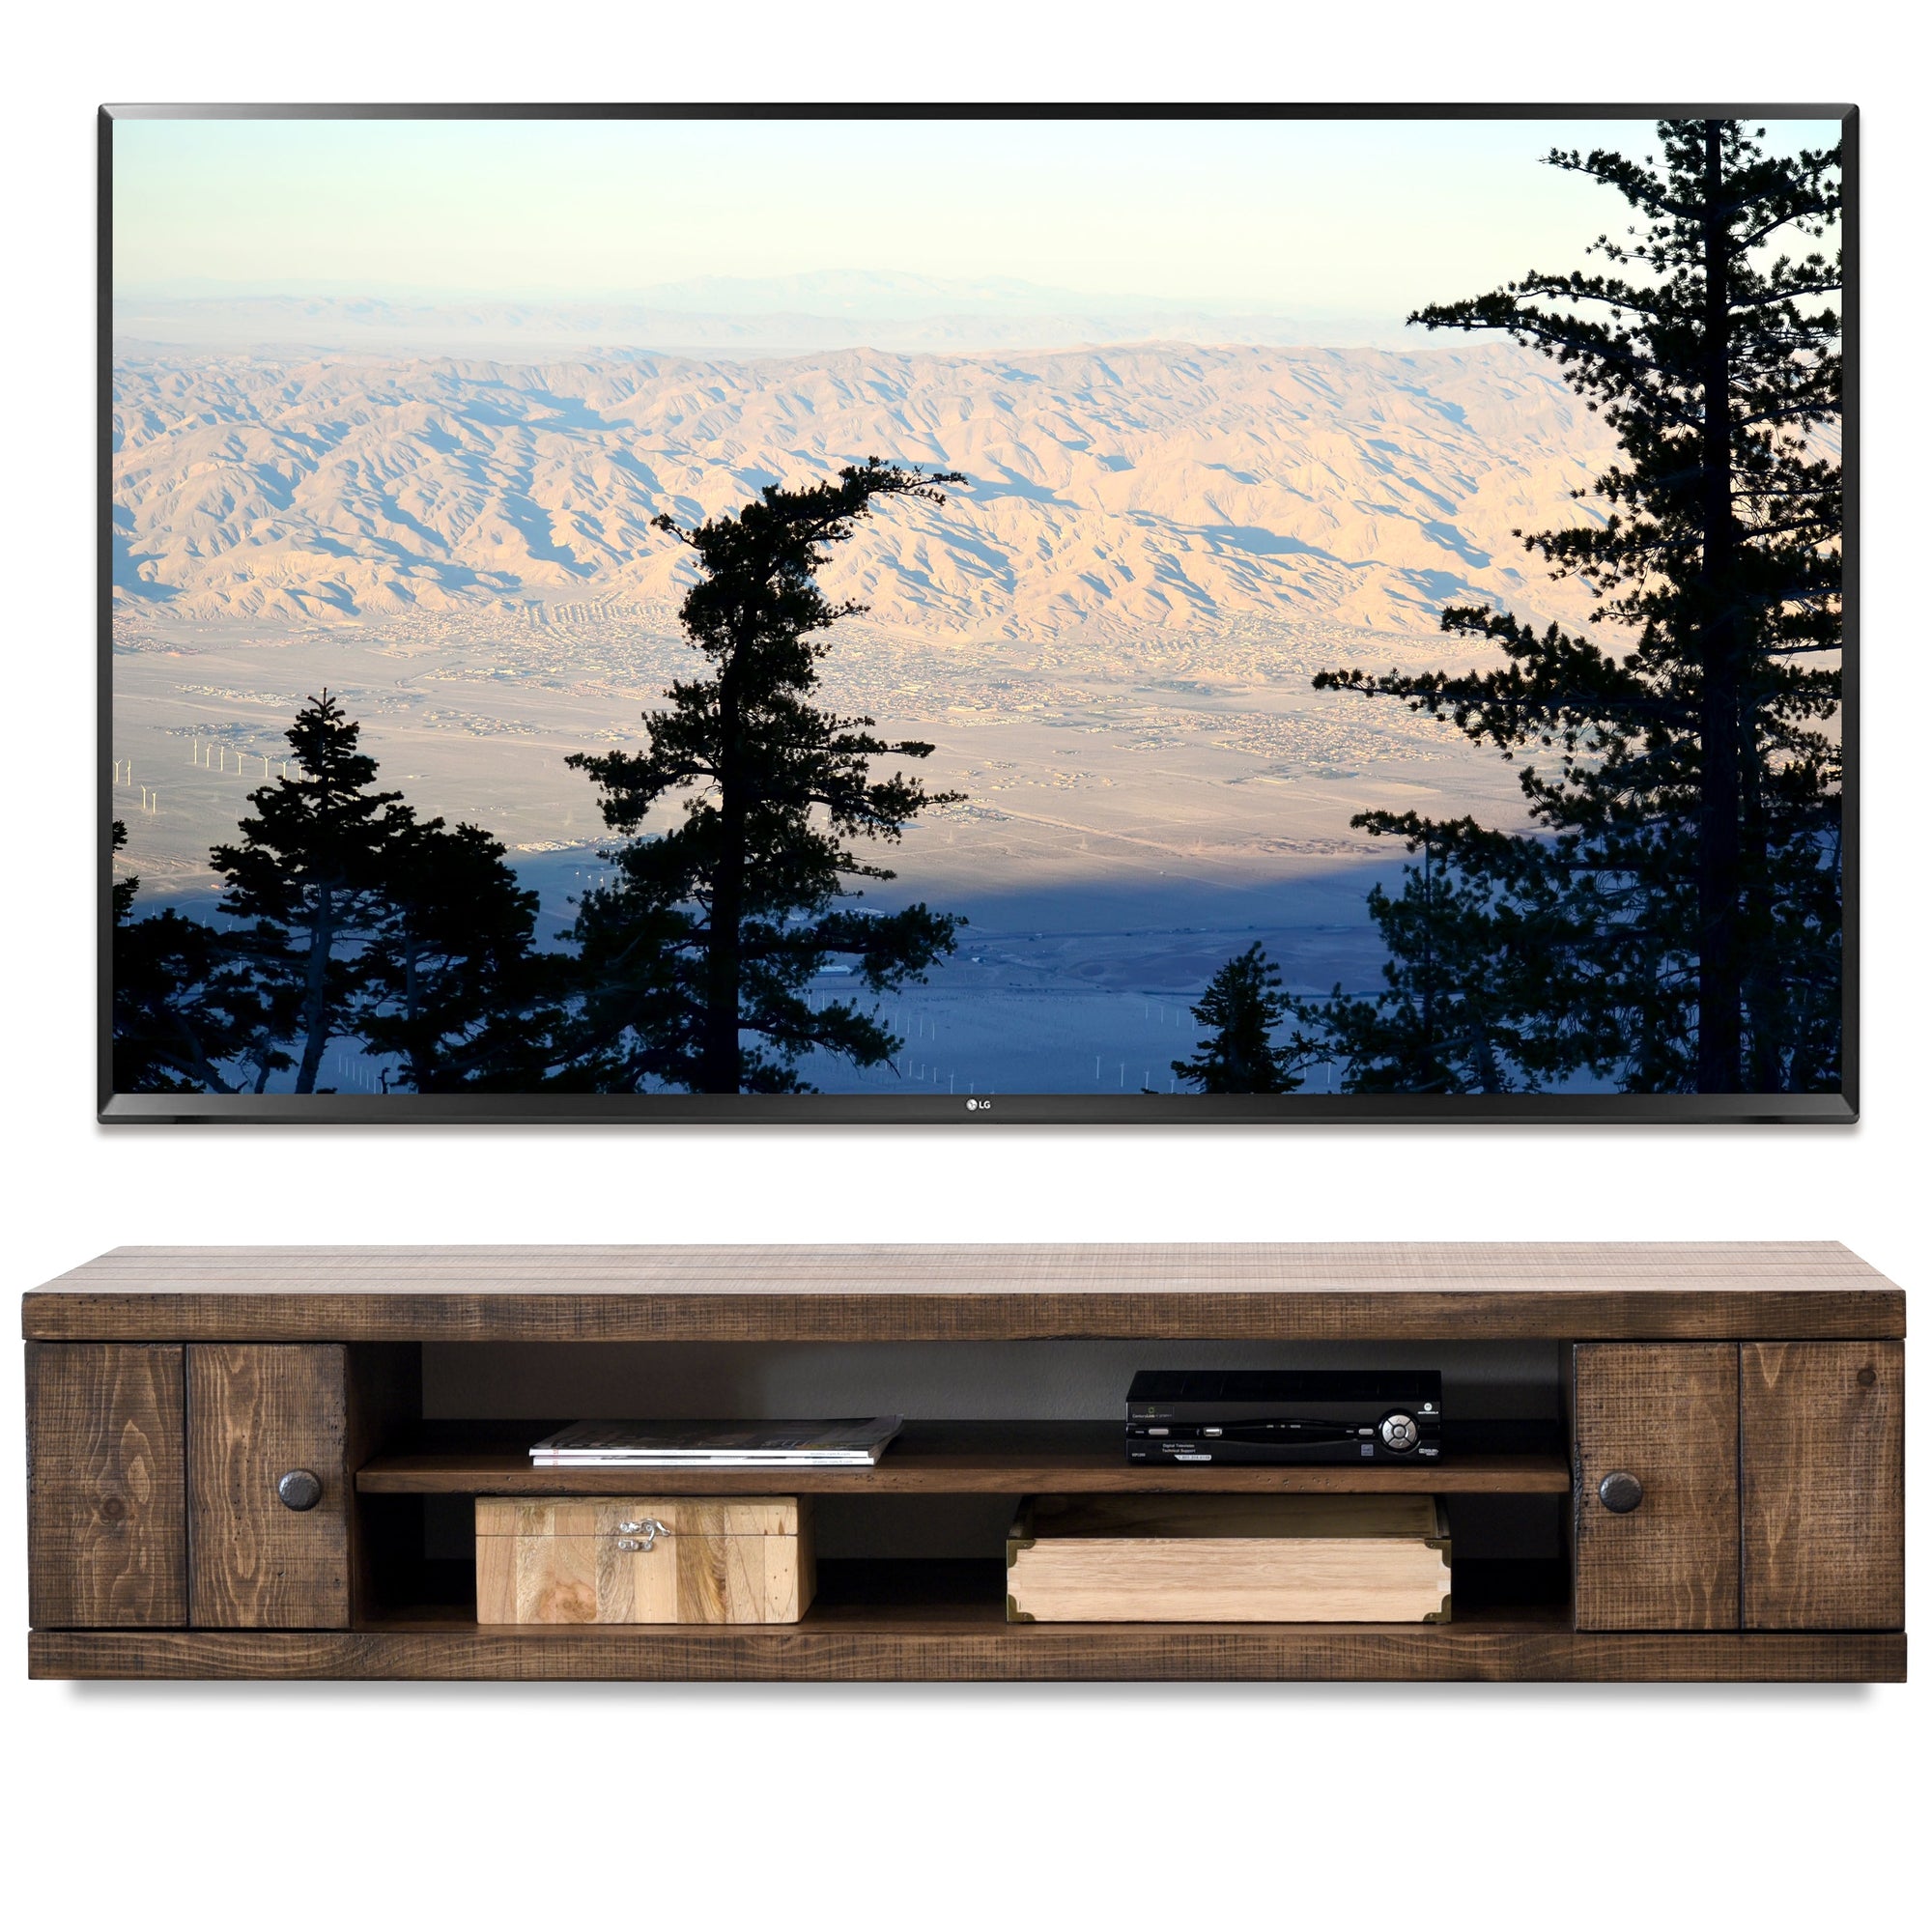 Rustic Barn Wood Style Floating TV Stand - Farmhouse - Spice - OB 50% OFF!